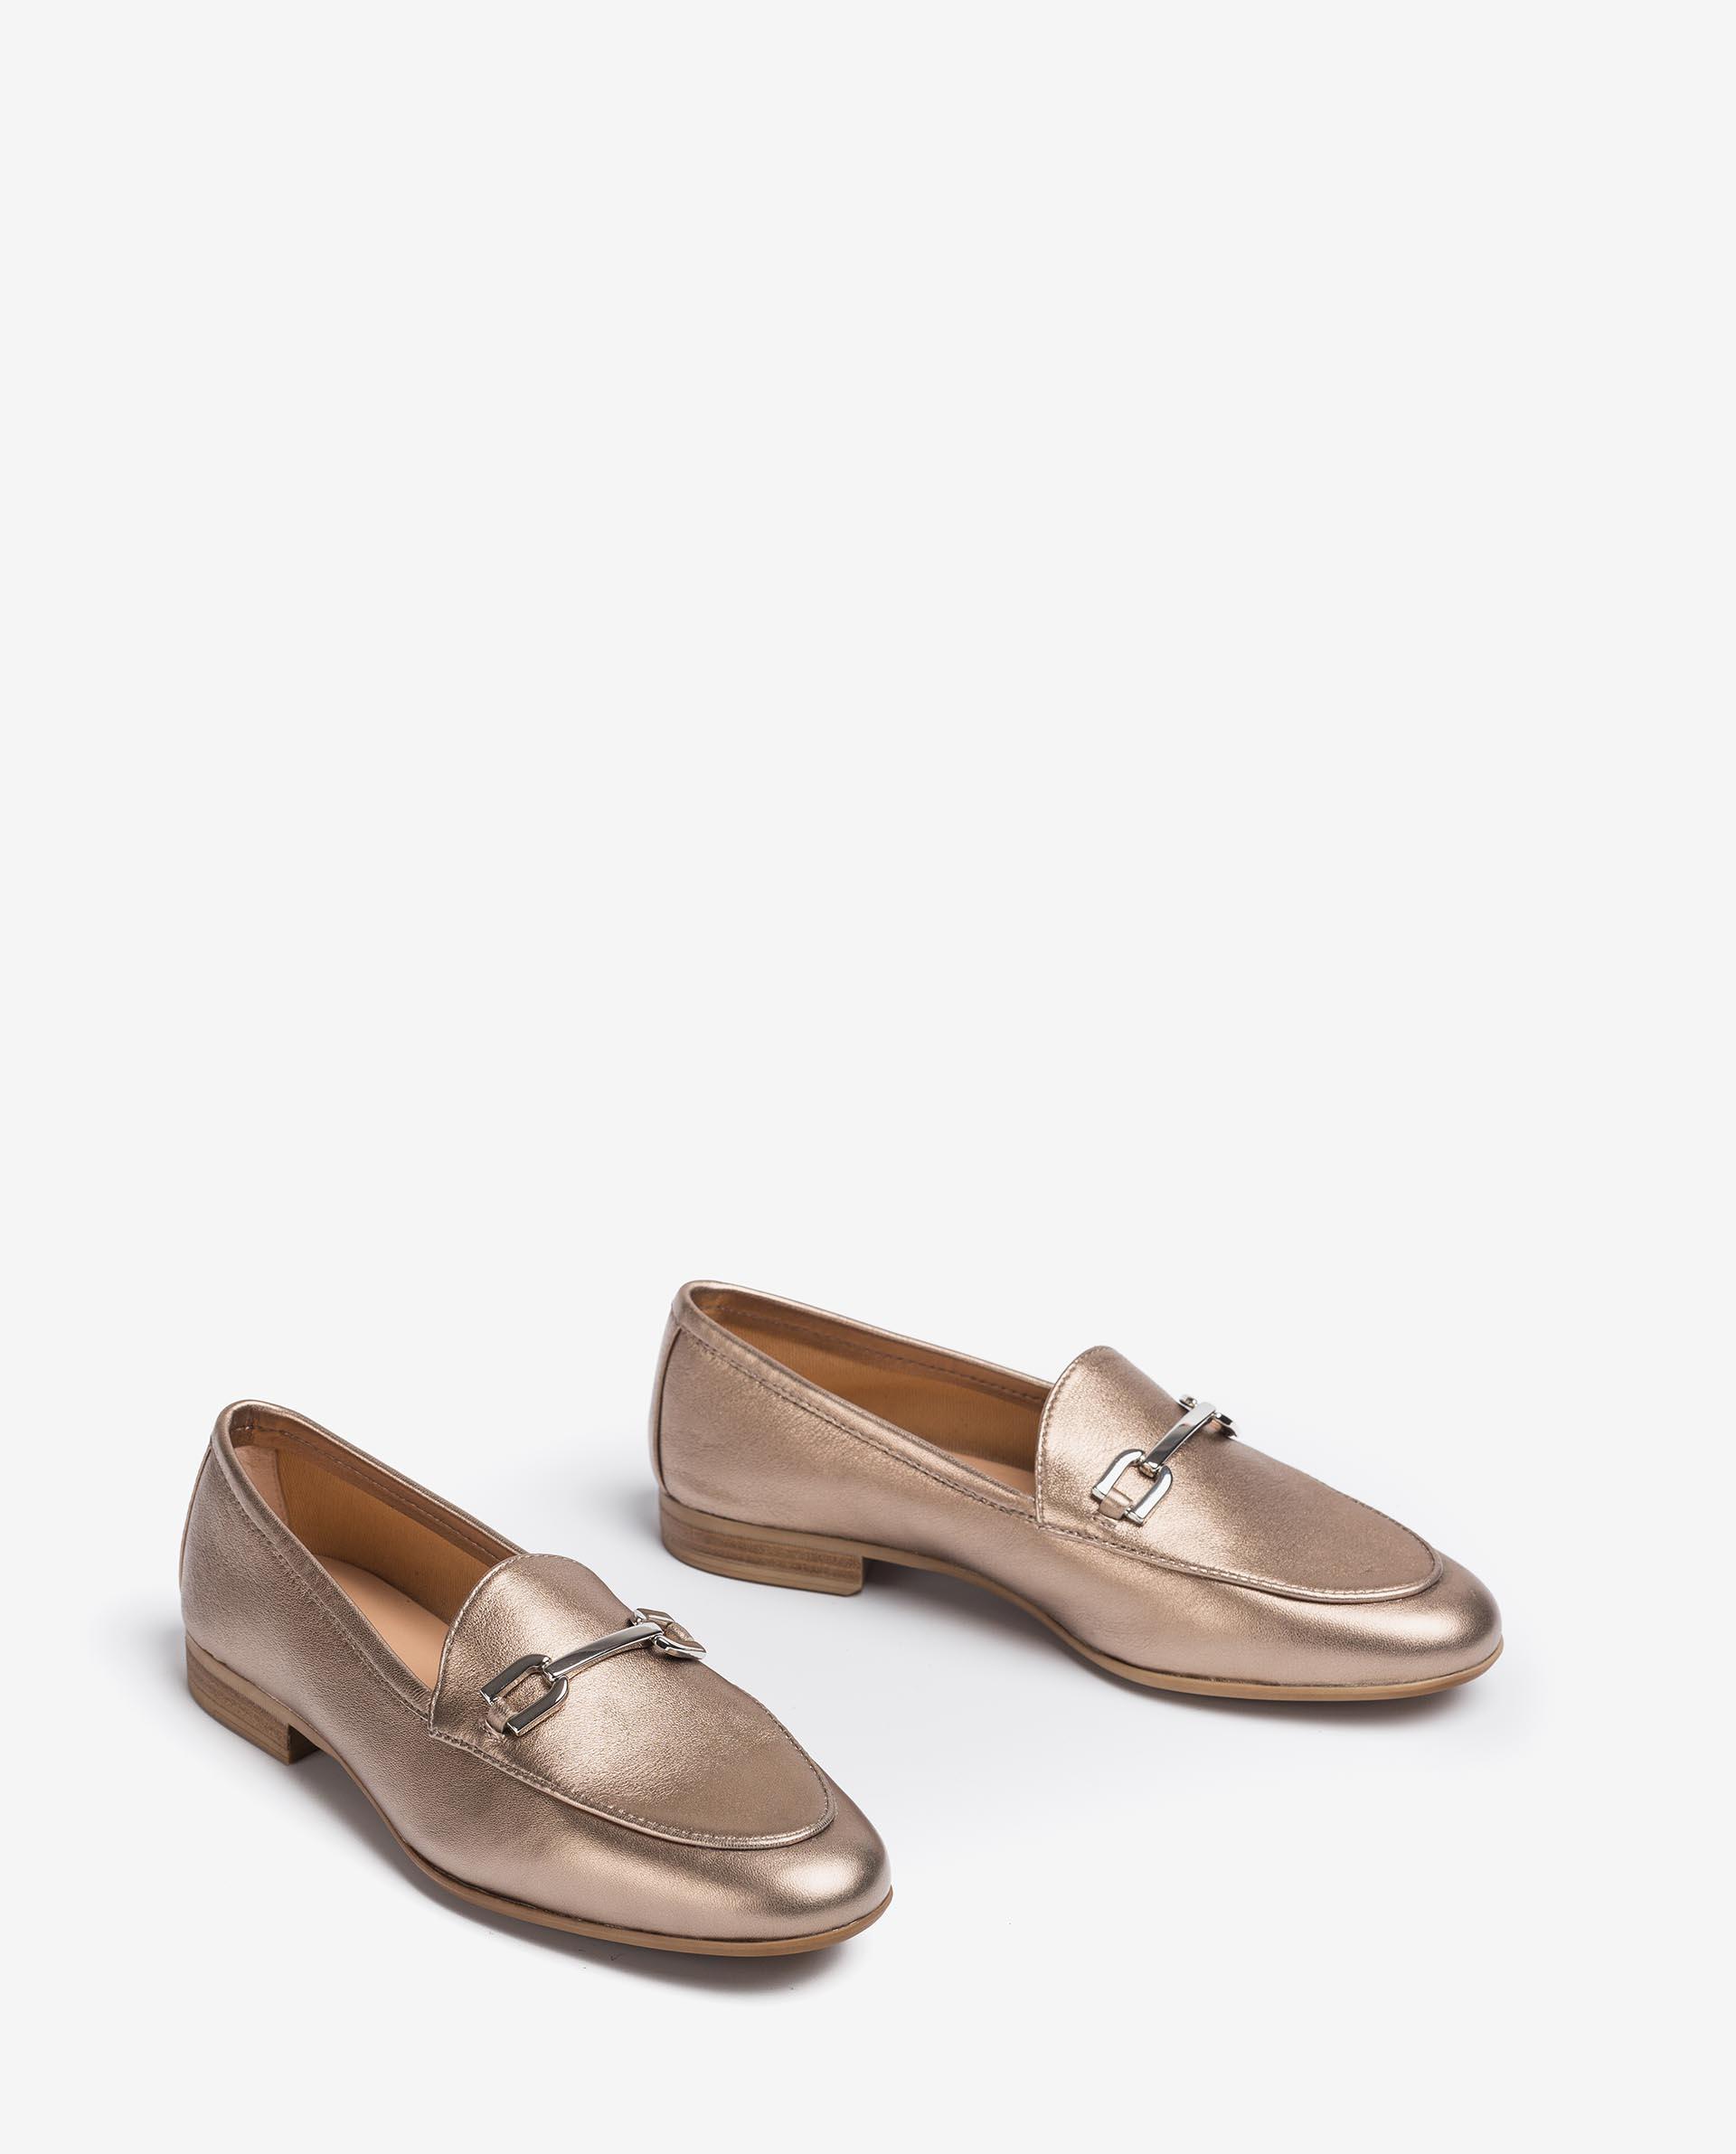 UNISA Metal effect leather loafers DALCY_21_LMT 2